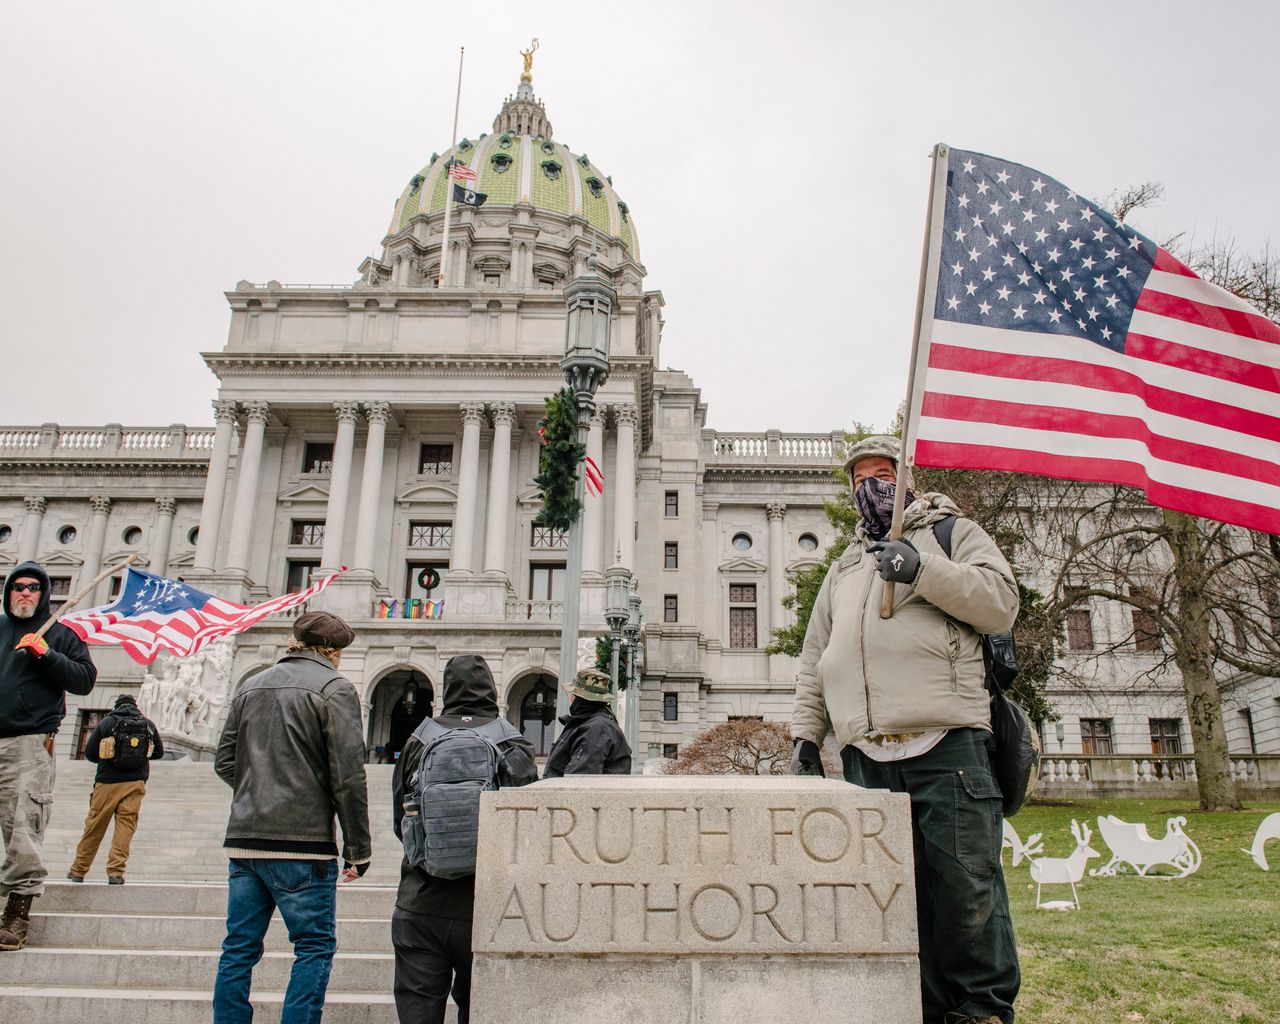 Protesters rallied outside the Pennsylvania state Capitol in Harrisburg on Jan. 6 — the same day insurrectionists invaded the U.S. Capitol in Washington, D.C. — to demonstrate against the certification of Electoral College votes because of baseless allegations of voter fraud.